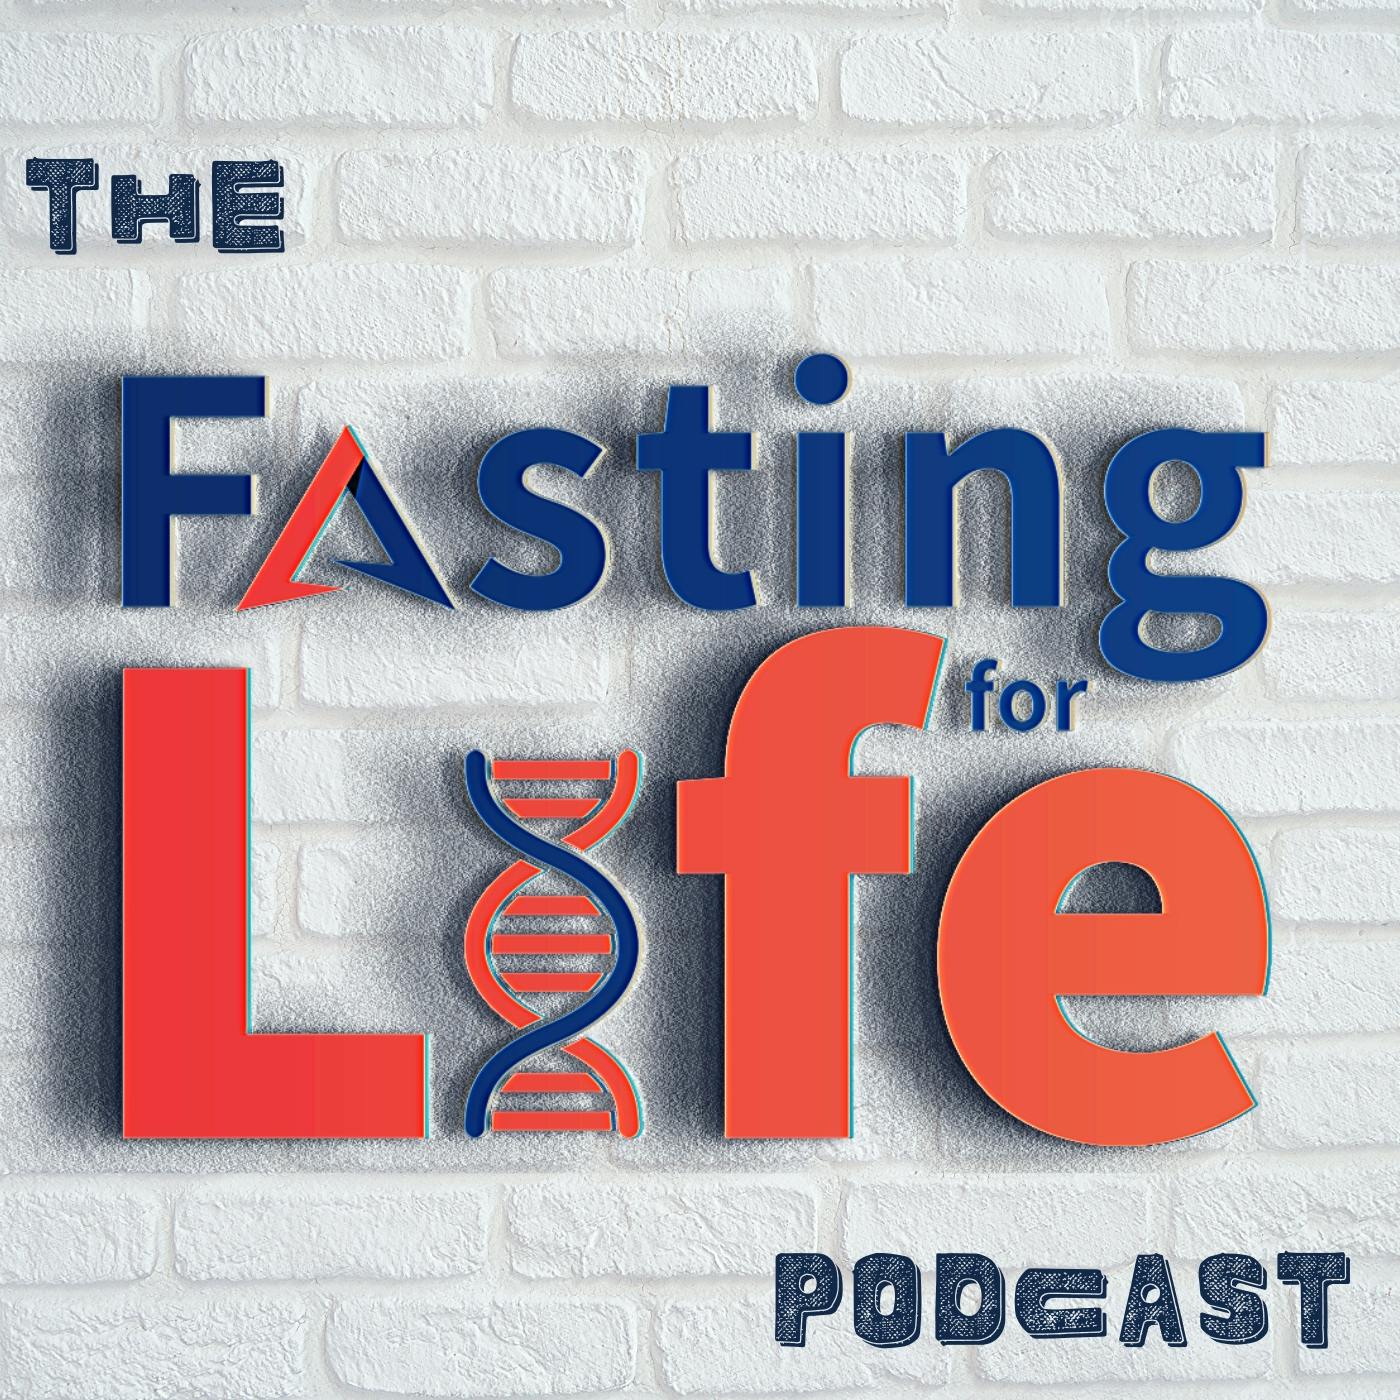 Ep. 39 - How to Lose 30 Pounds Fasting, Fasting Calorie Math, | ADF Alternate Day Fasting vs. OMAD One Meal a Day vs. 16:8 Intermittent Fasting vs. 5:2 Diet | Weight Loss Plateaus, Motivation, Fasting